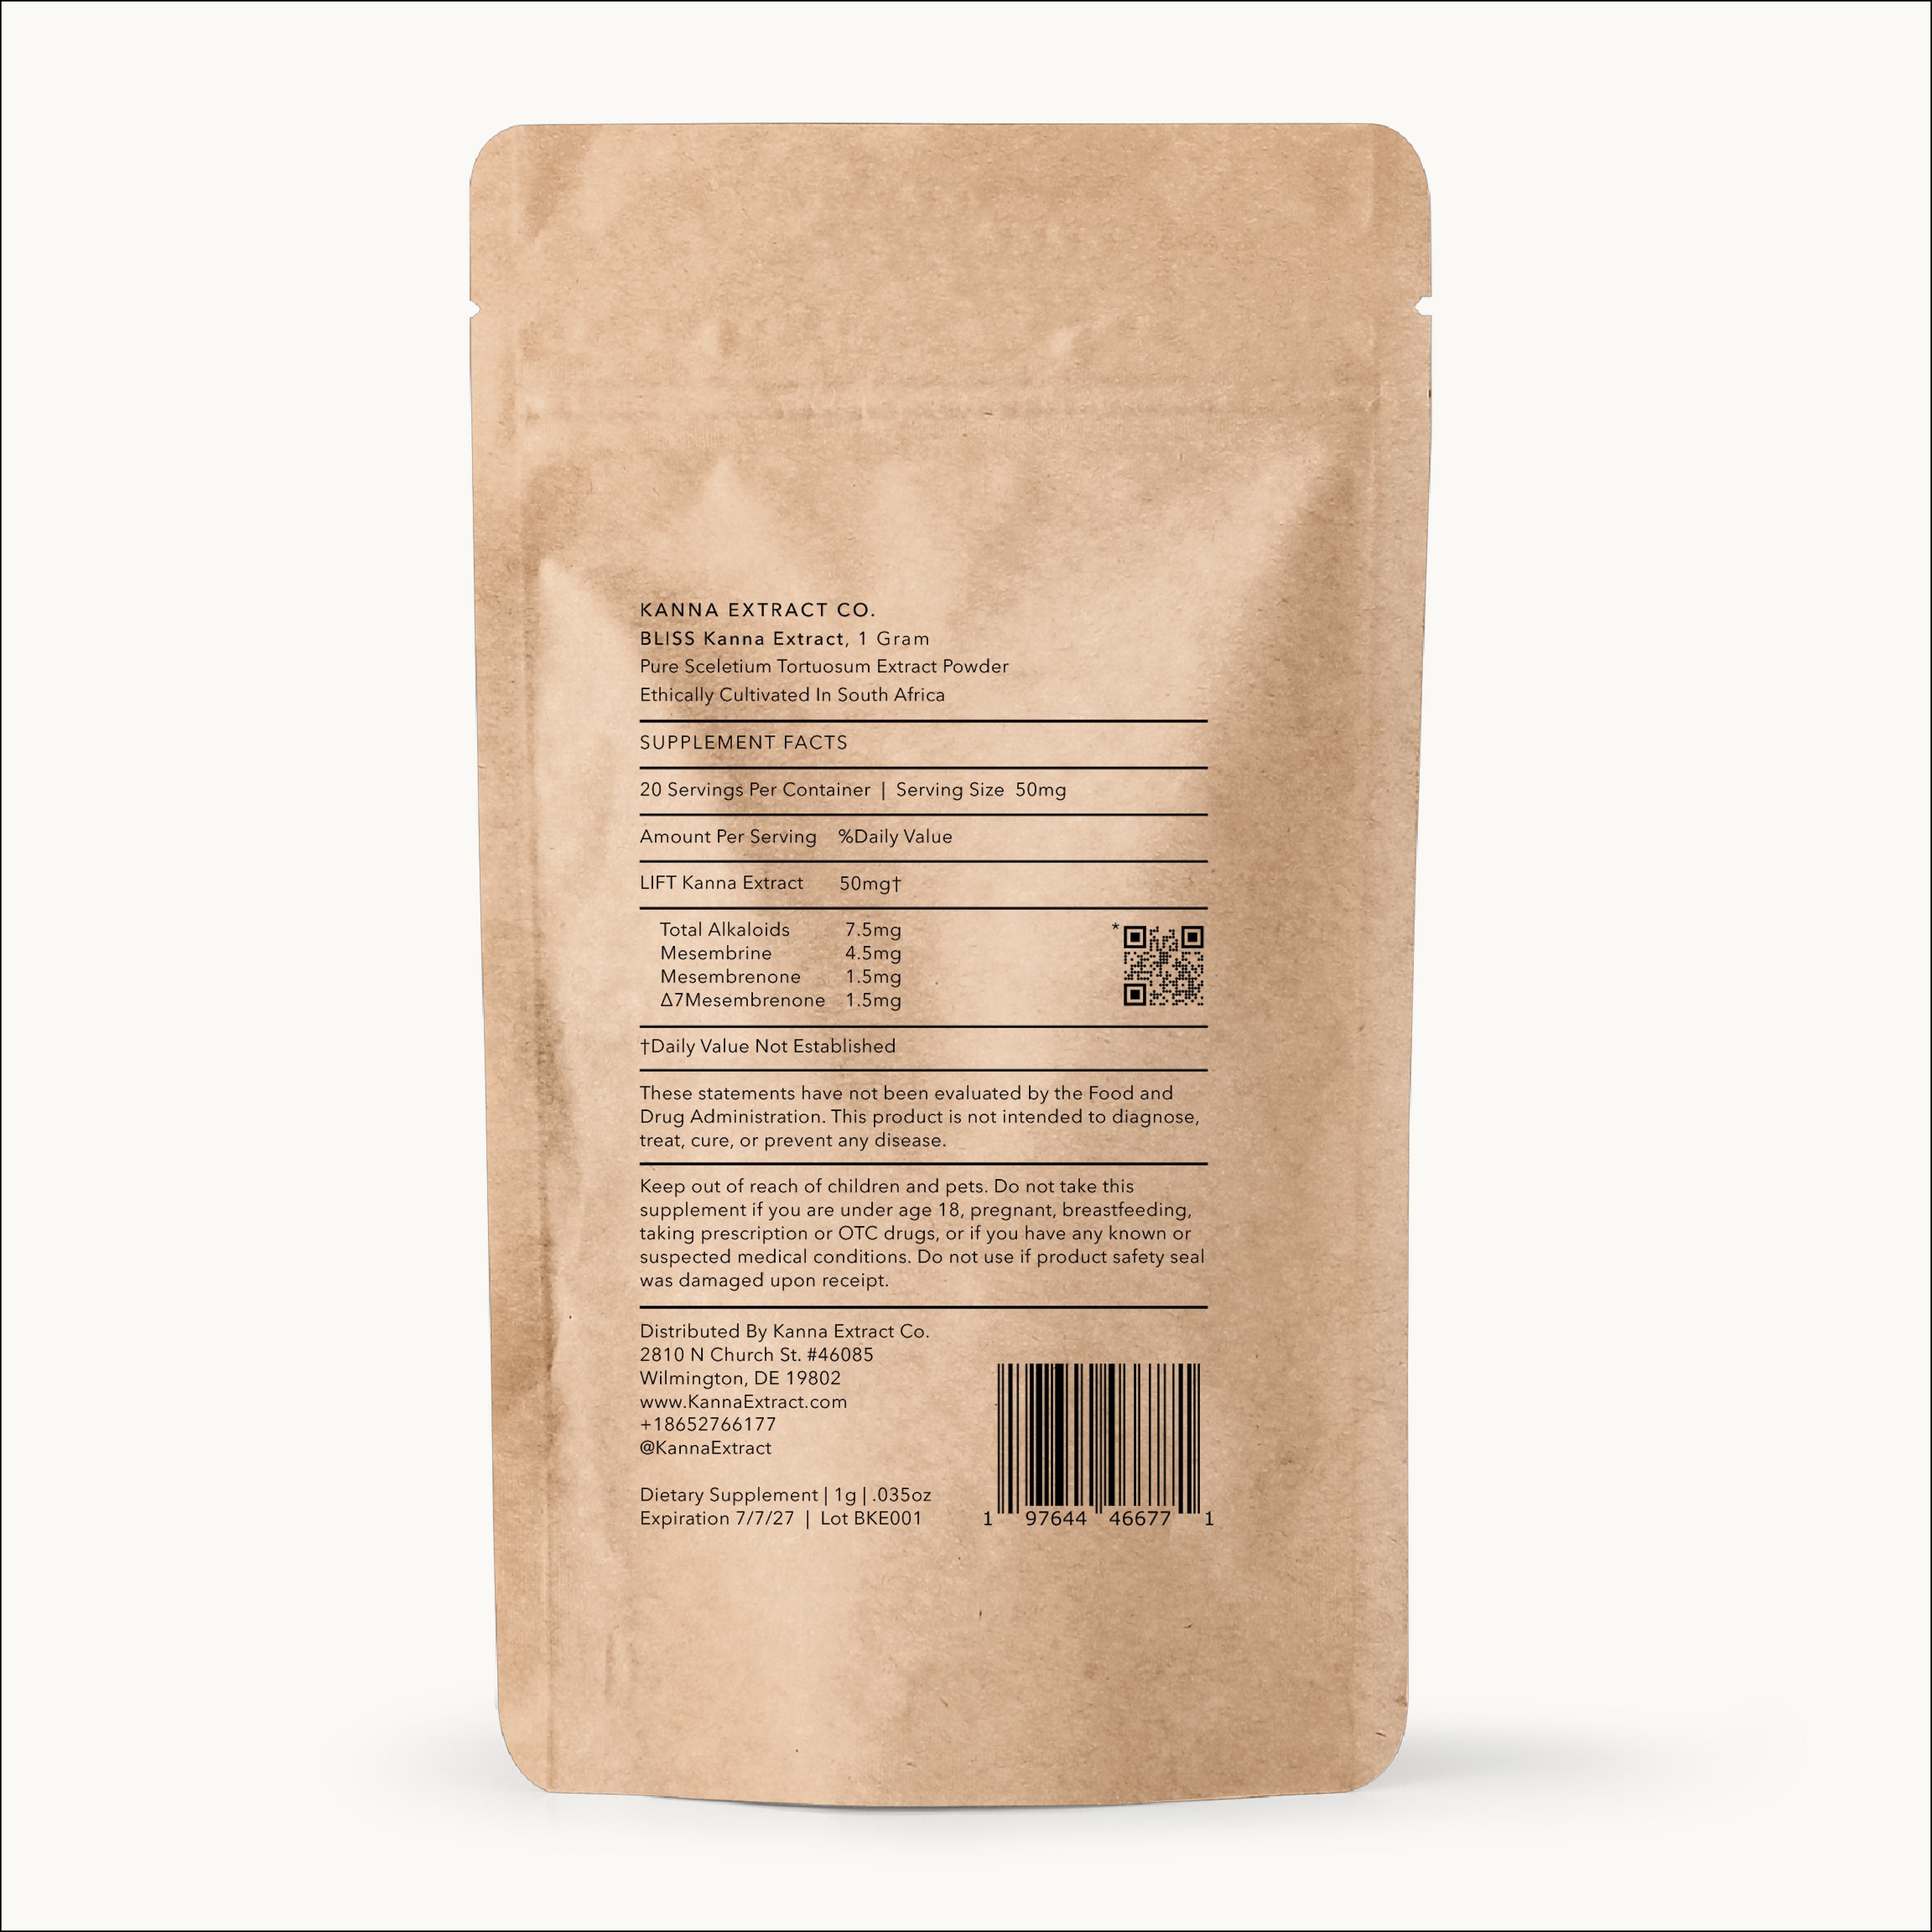 Kanna Extract Co BLISS Kanna Extract front Packaging describing mesembrine alkaloid content grown from DV17 high alkaloid sceletium tortuosum genetics ethically cultivated in South Africa for wholesale bulk b2b kanna extract